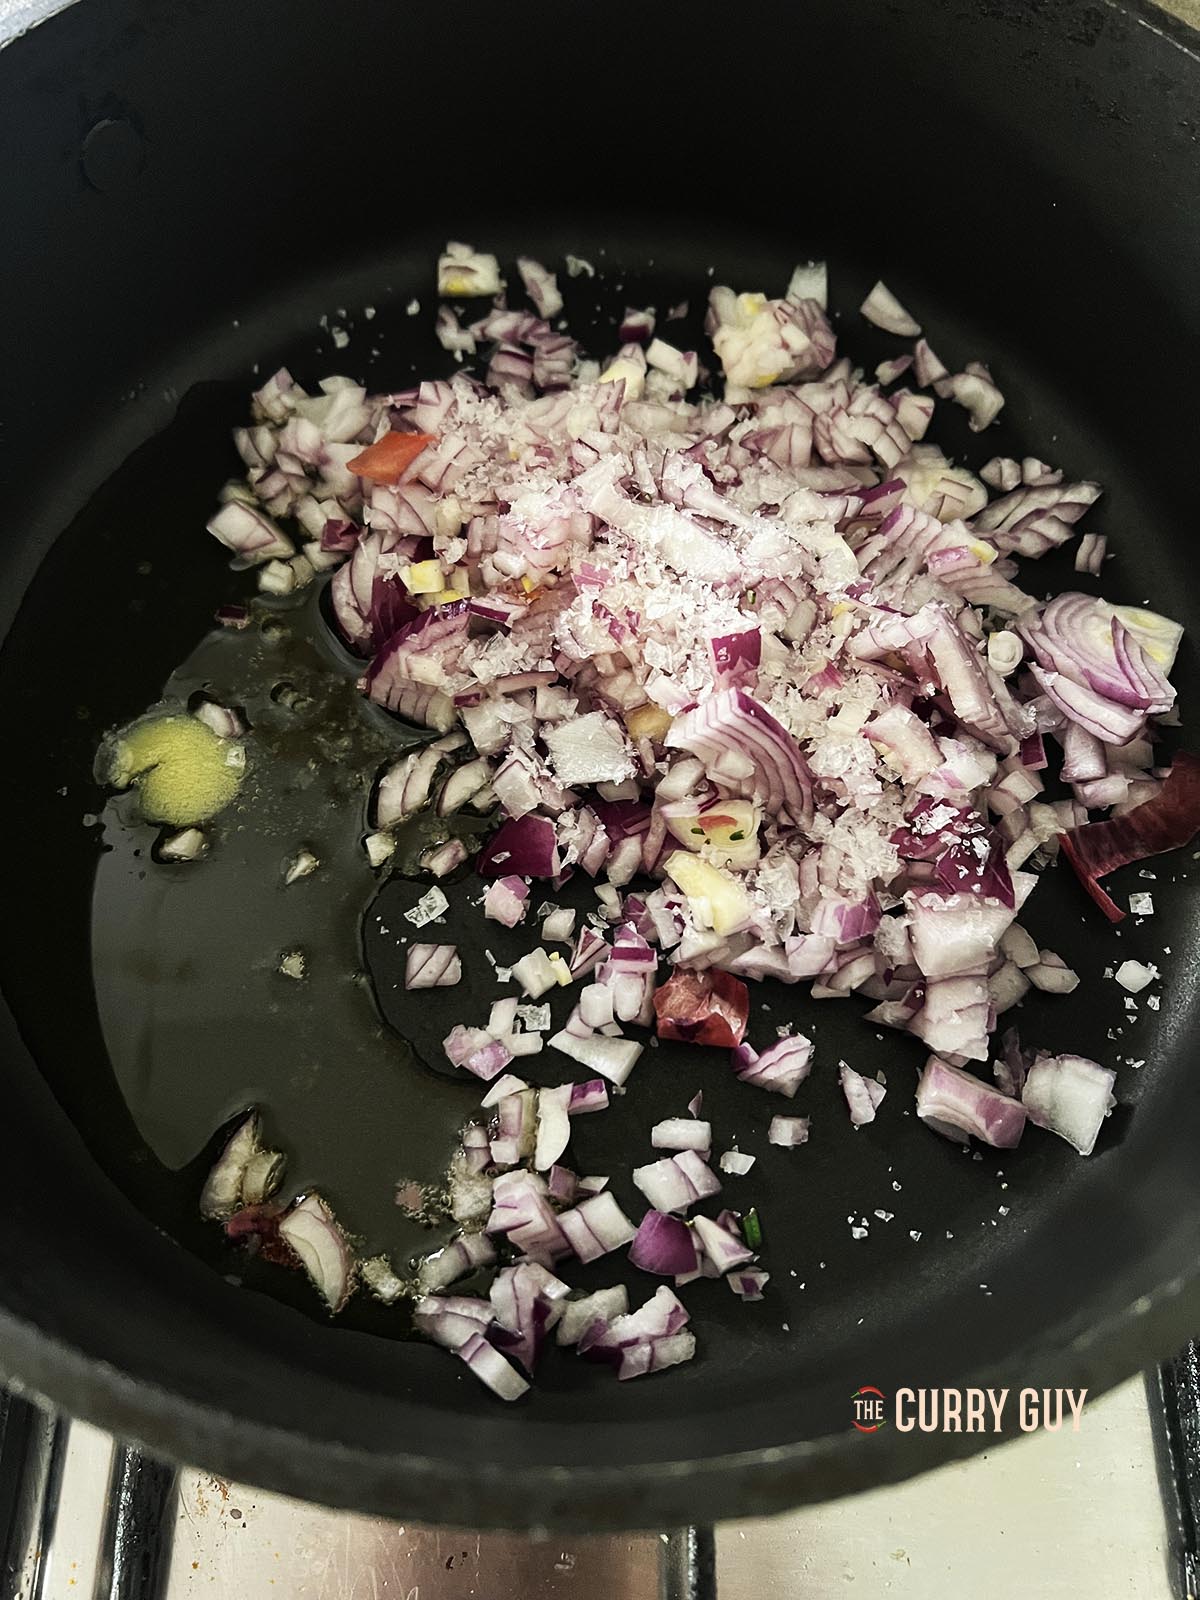 Melting the niter kebbeh in a large pan and adding the chopped onions along with about 1/2 tsp salt.